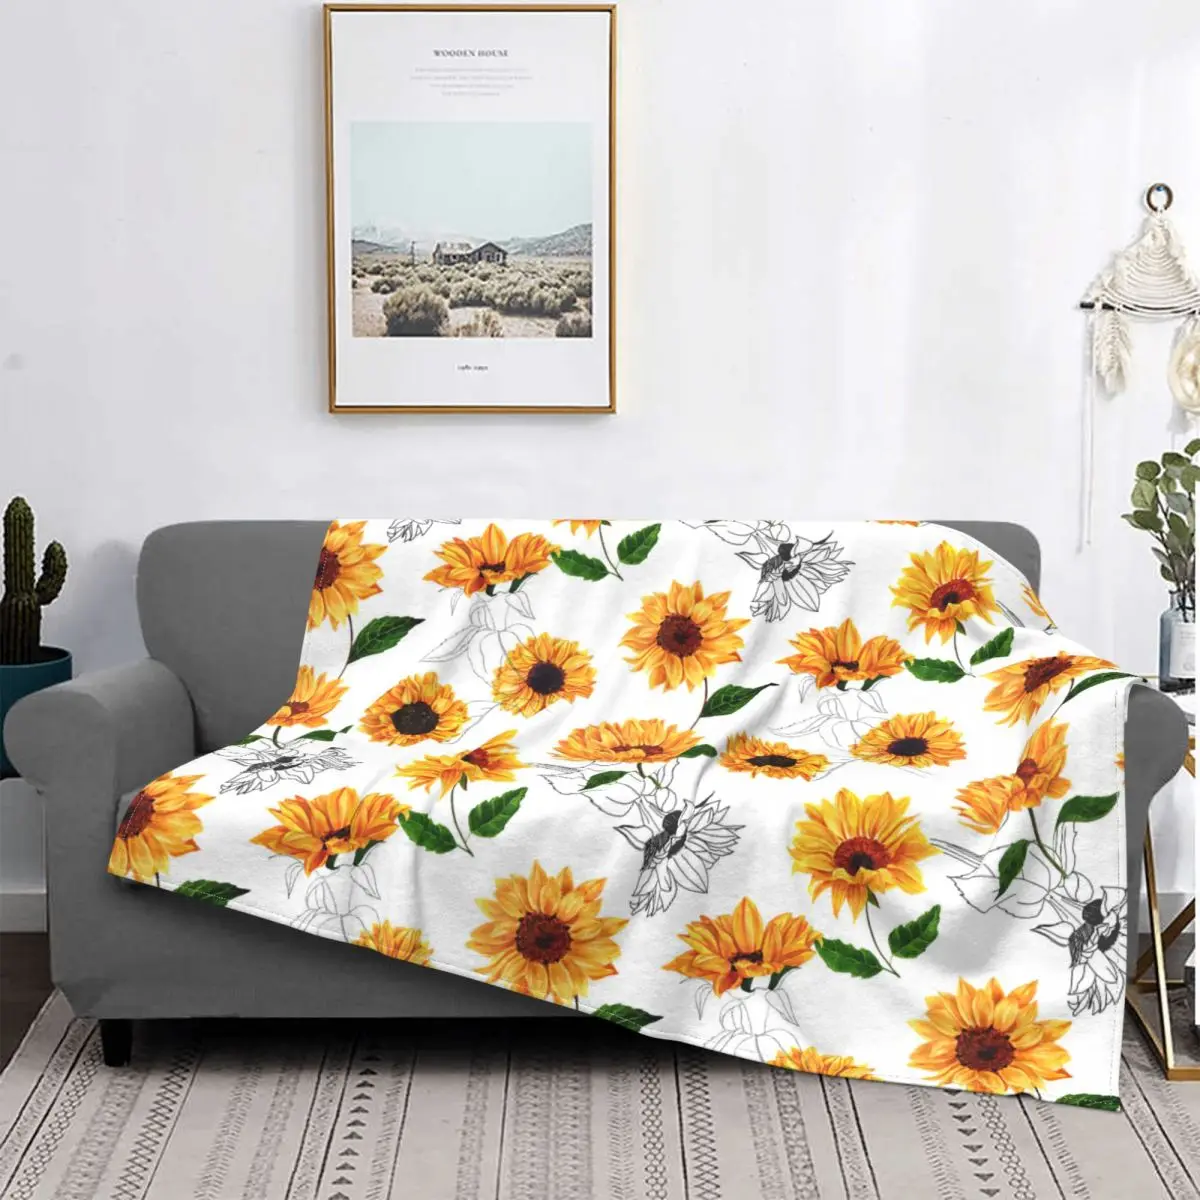 

Hand Drawn Sunflowers Pattern Blankets Fleece Decoration Ultra-Soft Throw Blankets for Bedding Bedroom Plush Thin Quilt